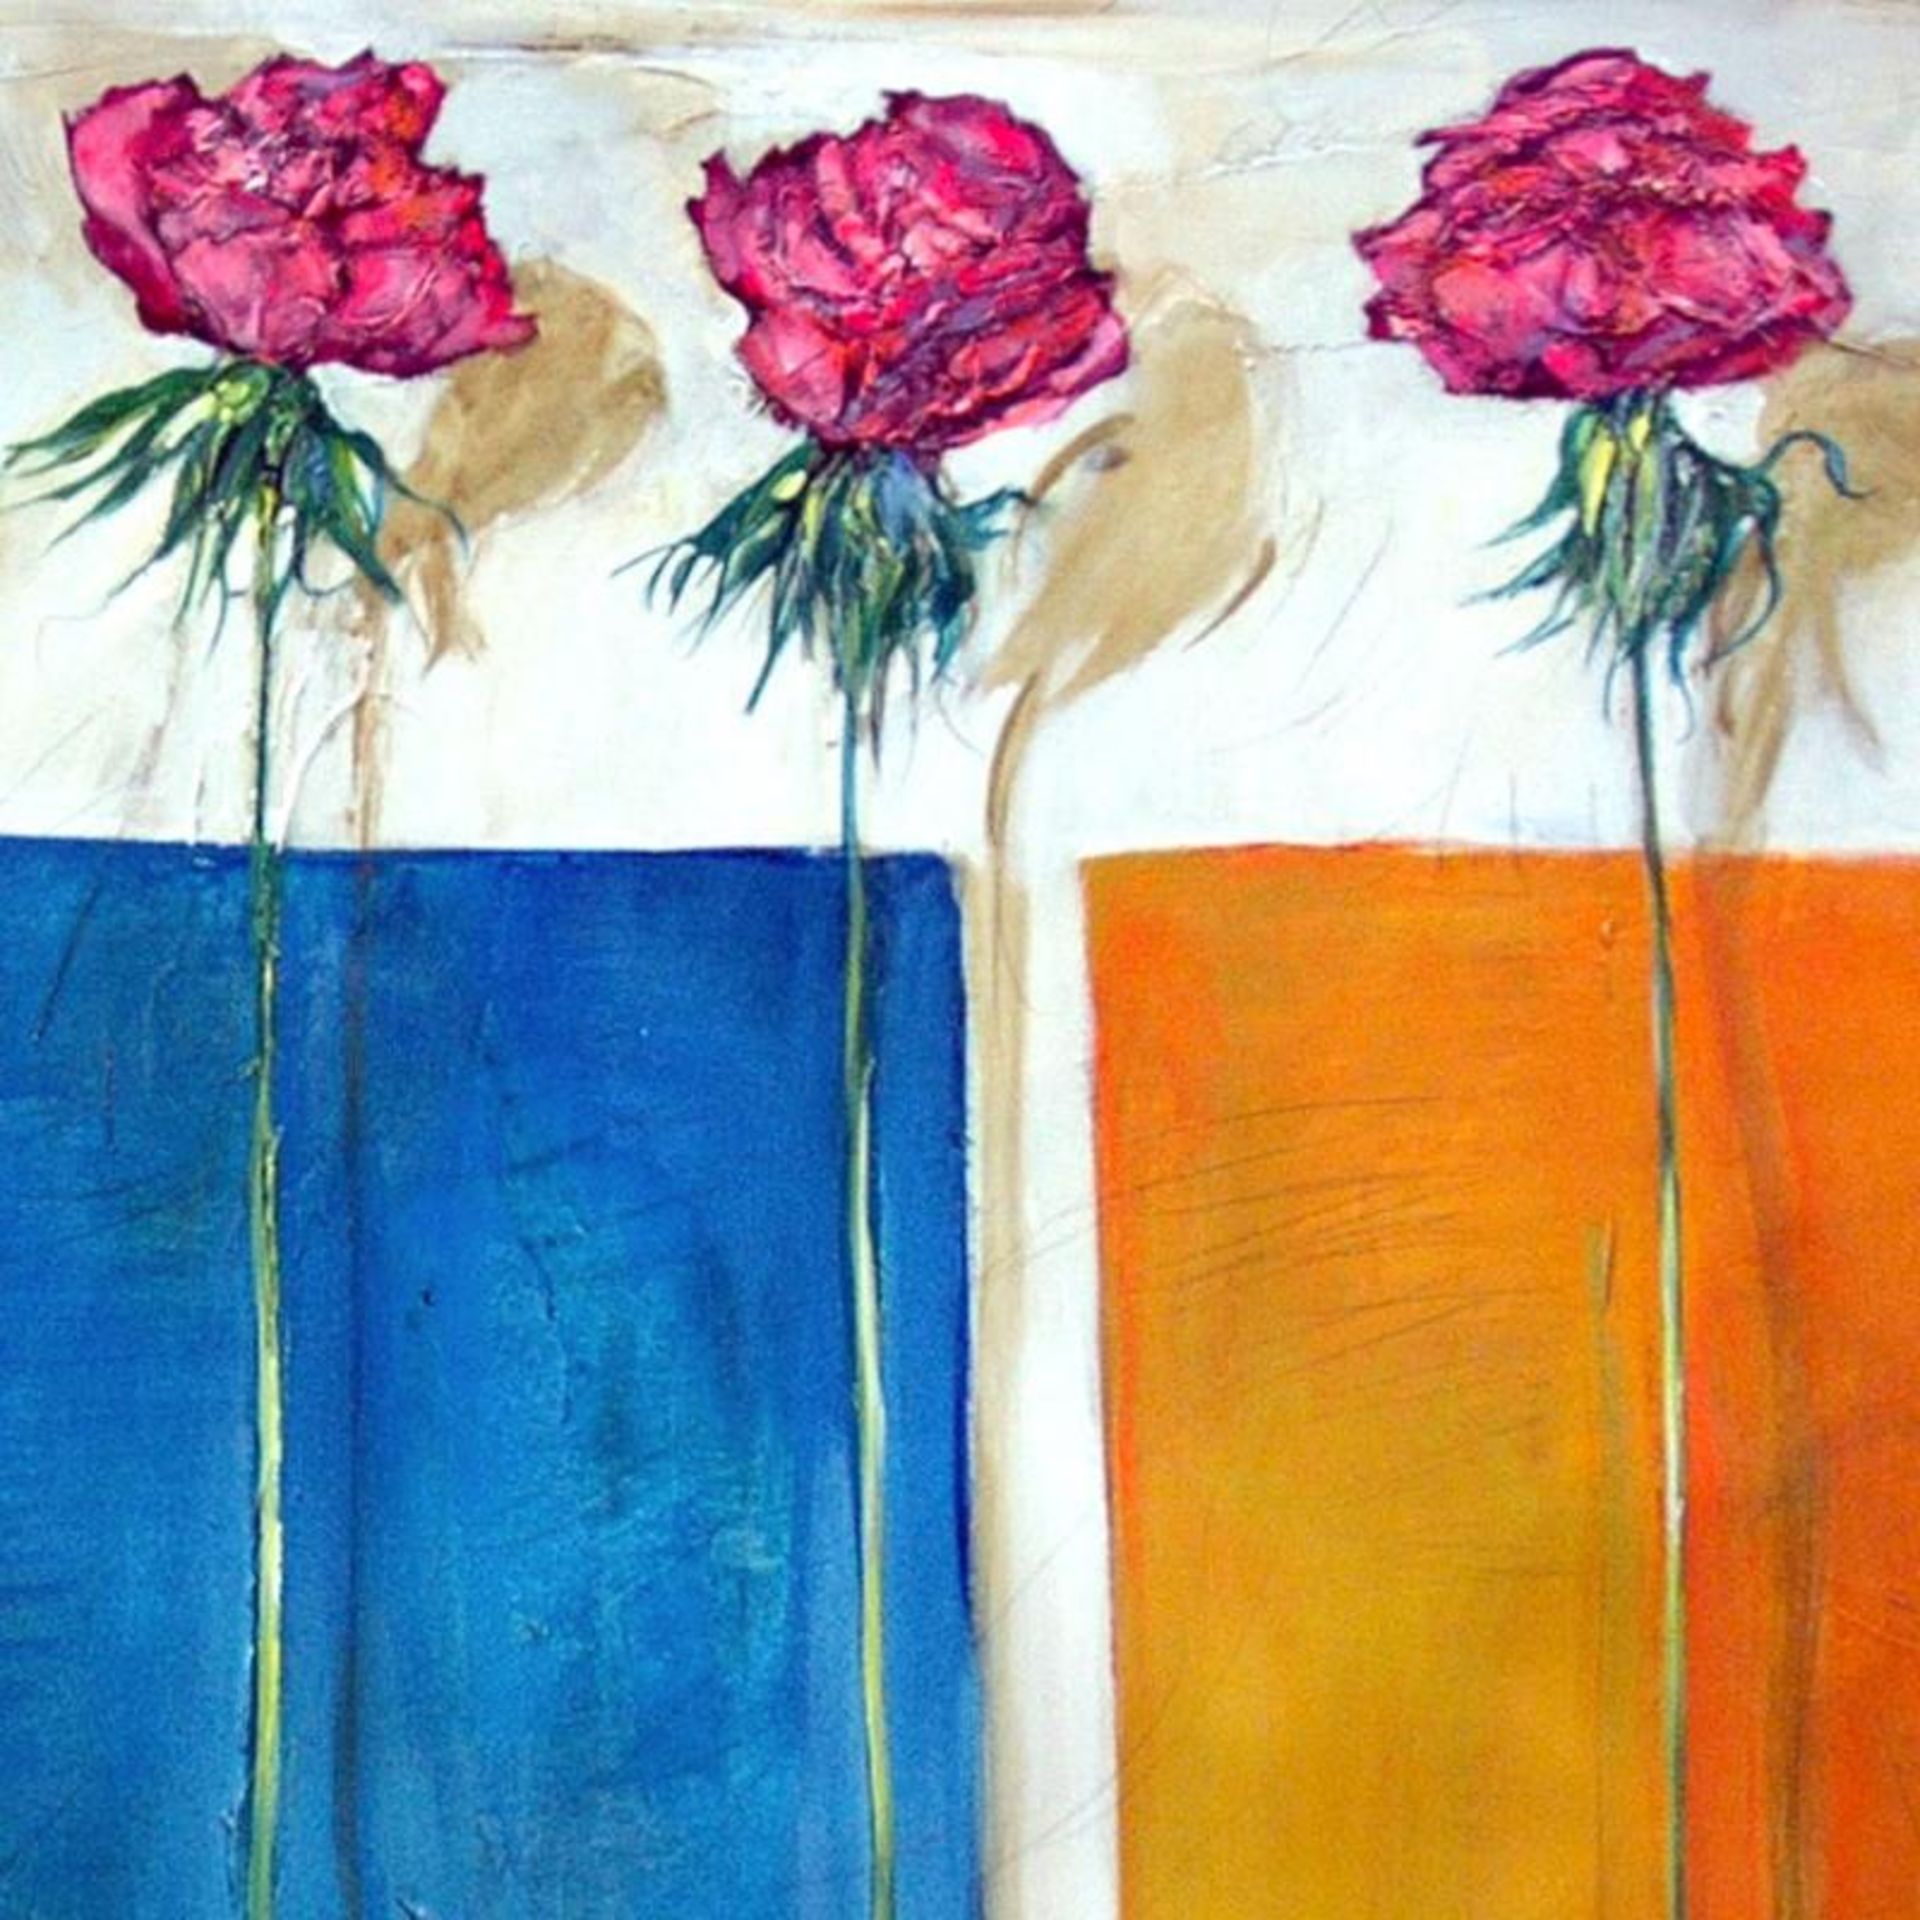 Lenner Gogli, "Coming Up Roses" Limited Edition on Canvas, Numbered and Hand Sig - Image 2 of 2